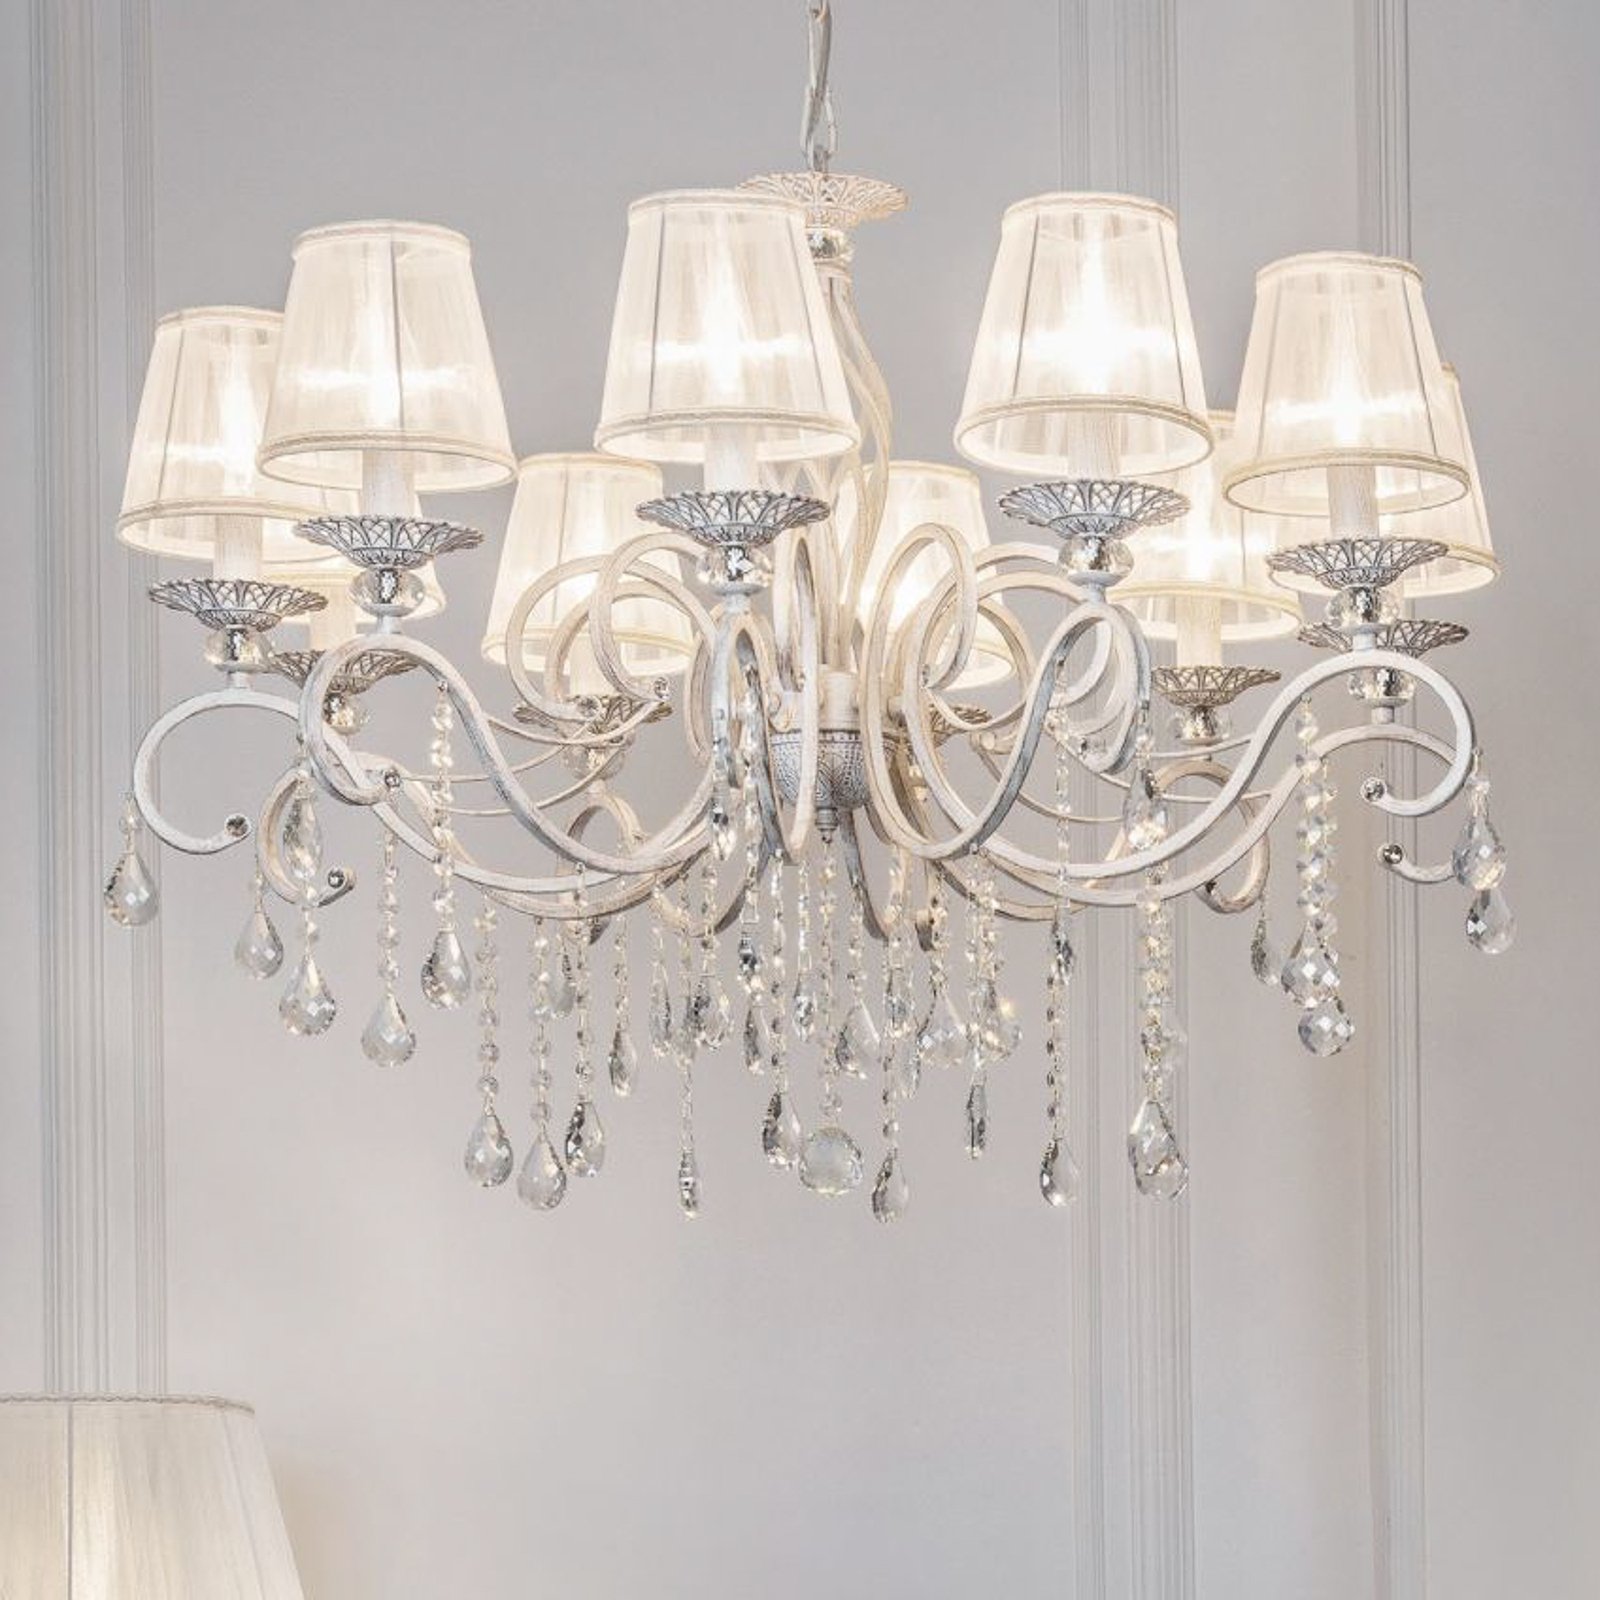 Grace chandelier white with lampshades, ten-bulb